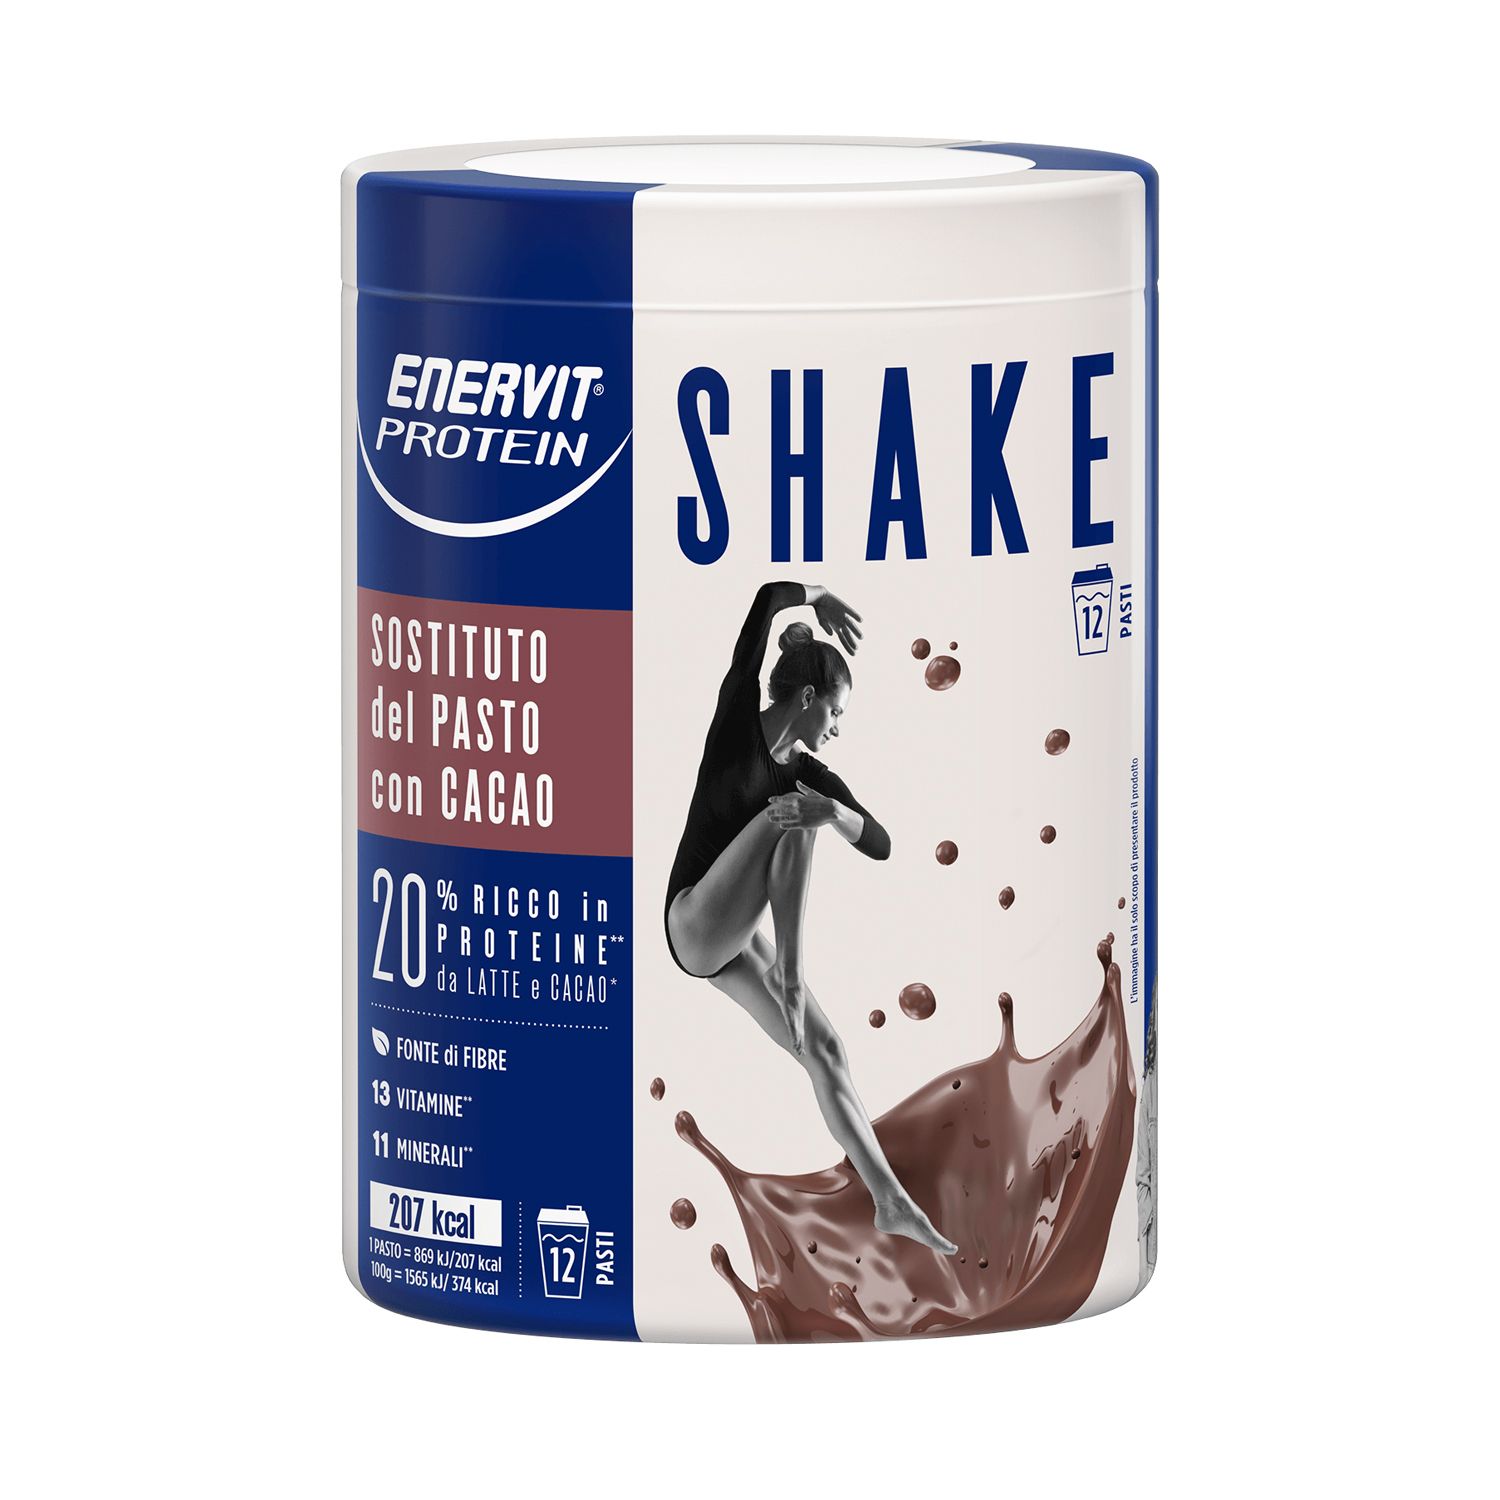 Image of ENERVIT PROTEIN Meal Shake Cacao